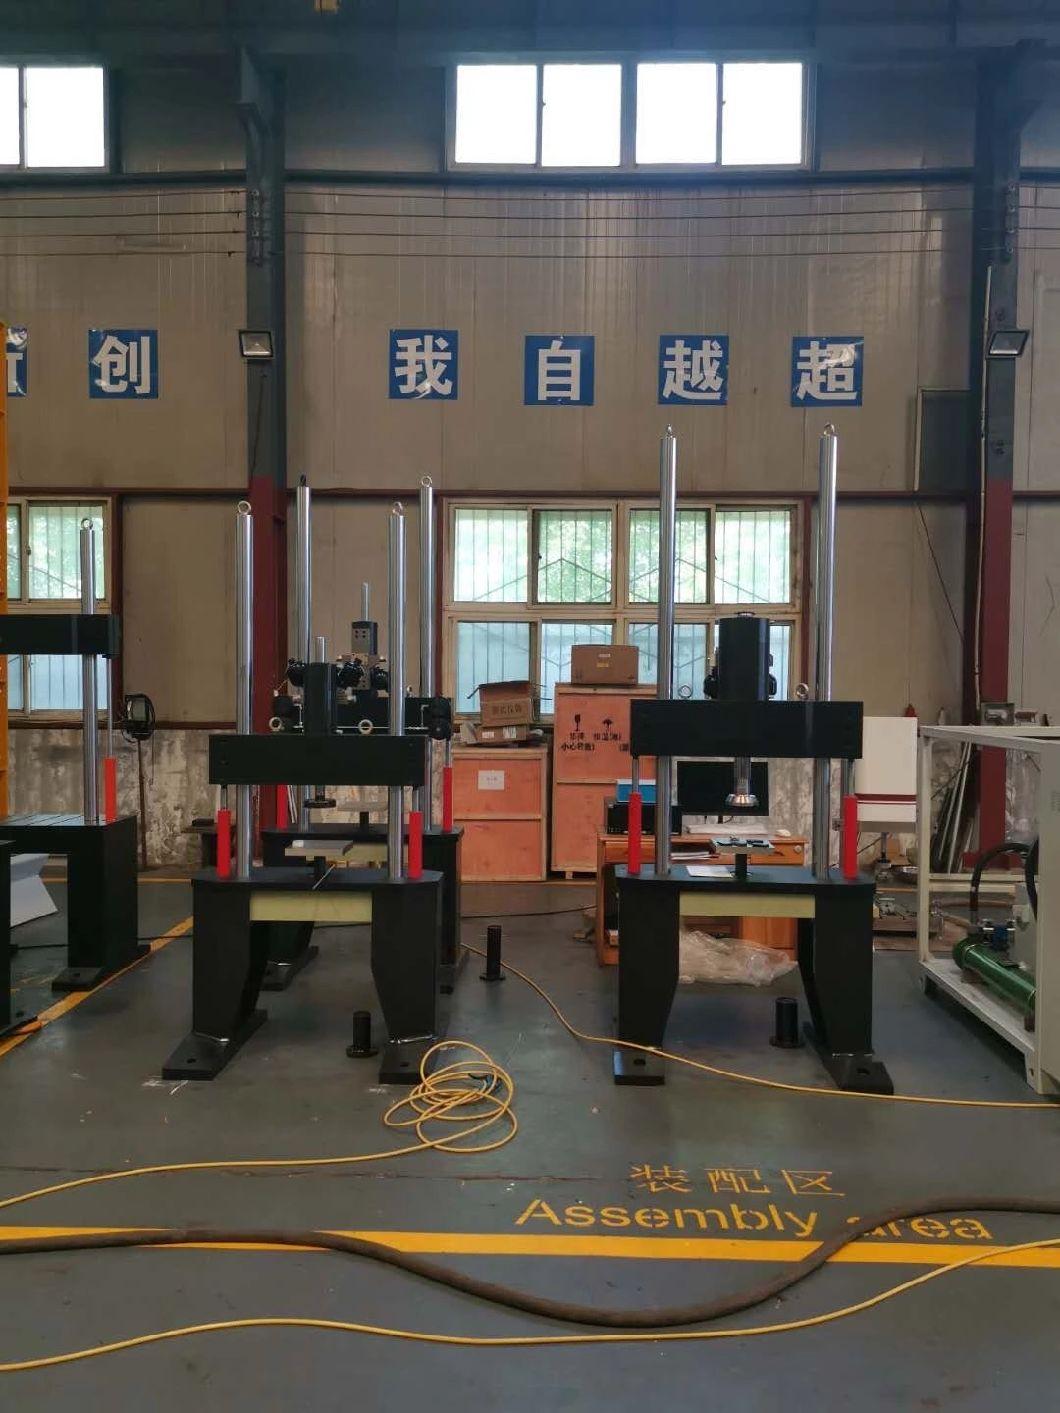 High-Quality and High-Precision Pws-25 Dynamic and Static Fatigue Testing Machine for Laboratory